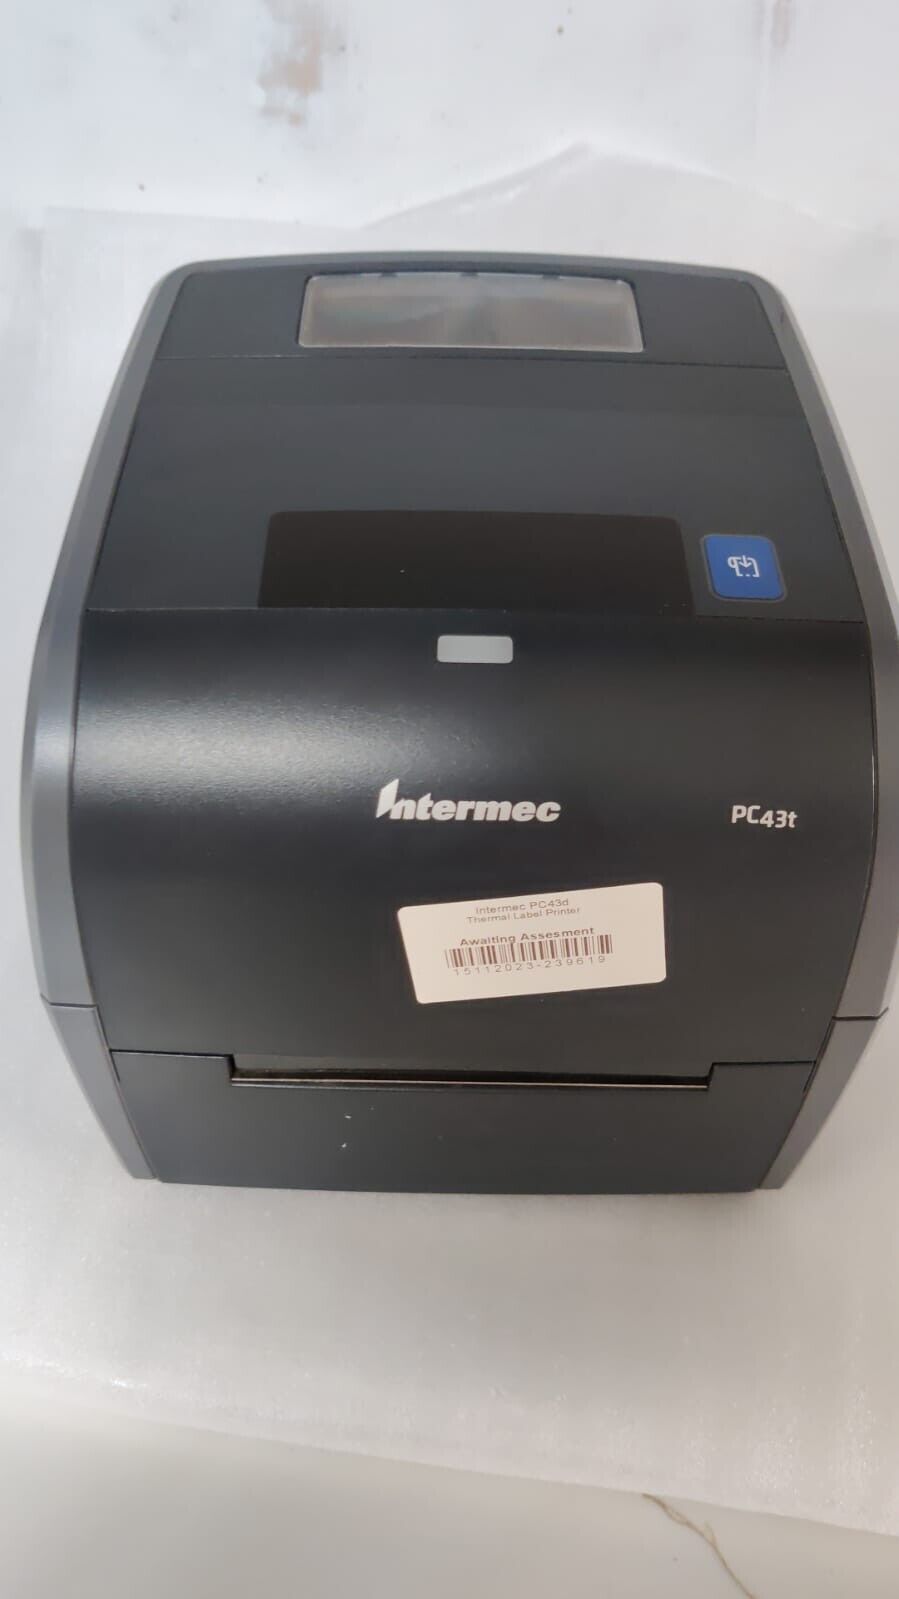 Intermec PC43t Thermal USB Label Barcode Printer - With Power Supply